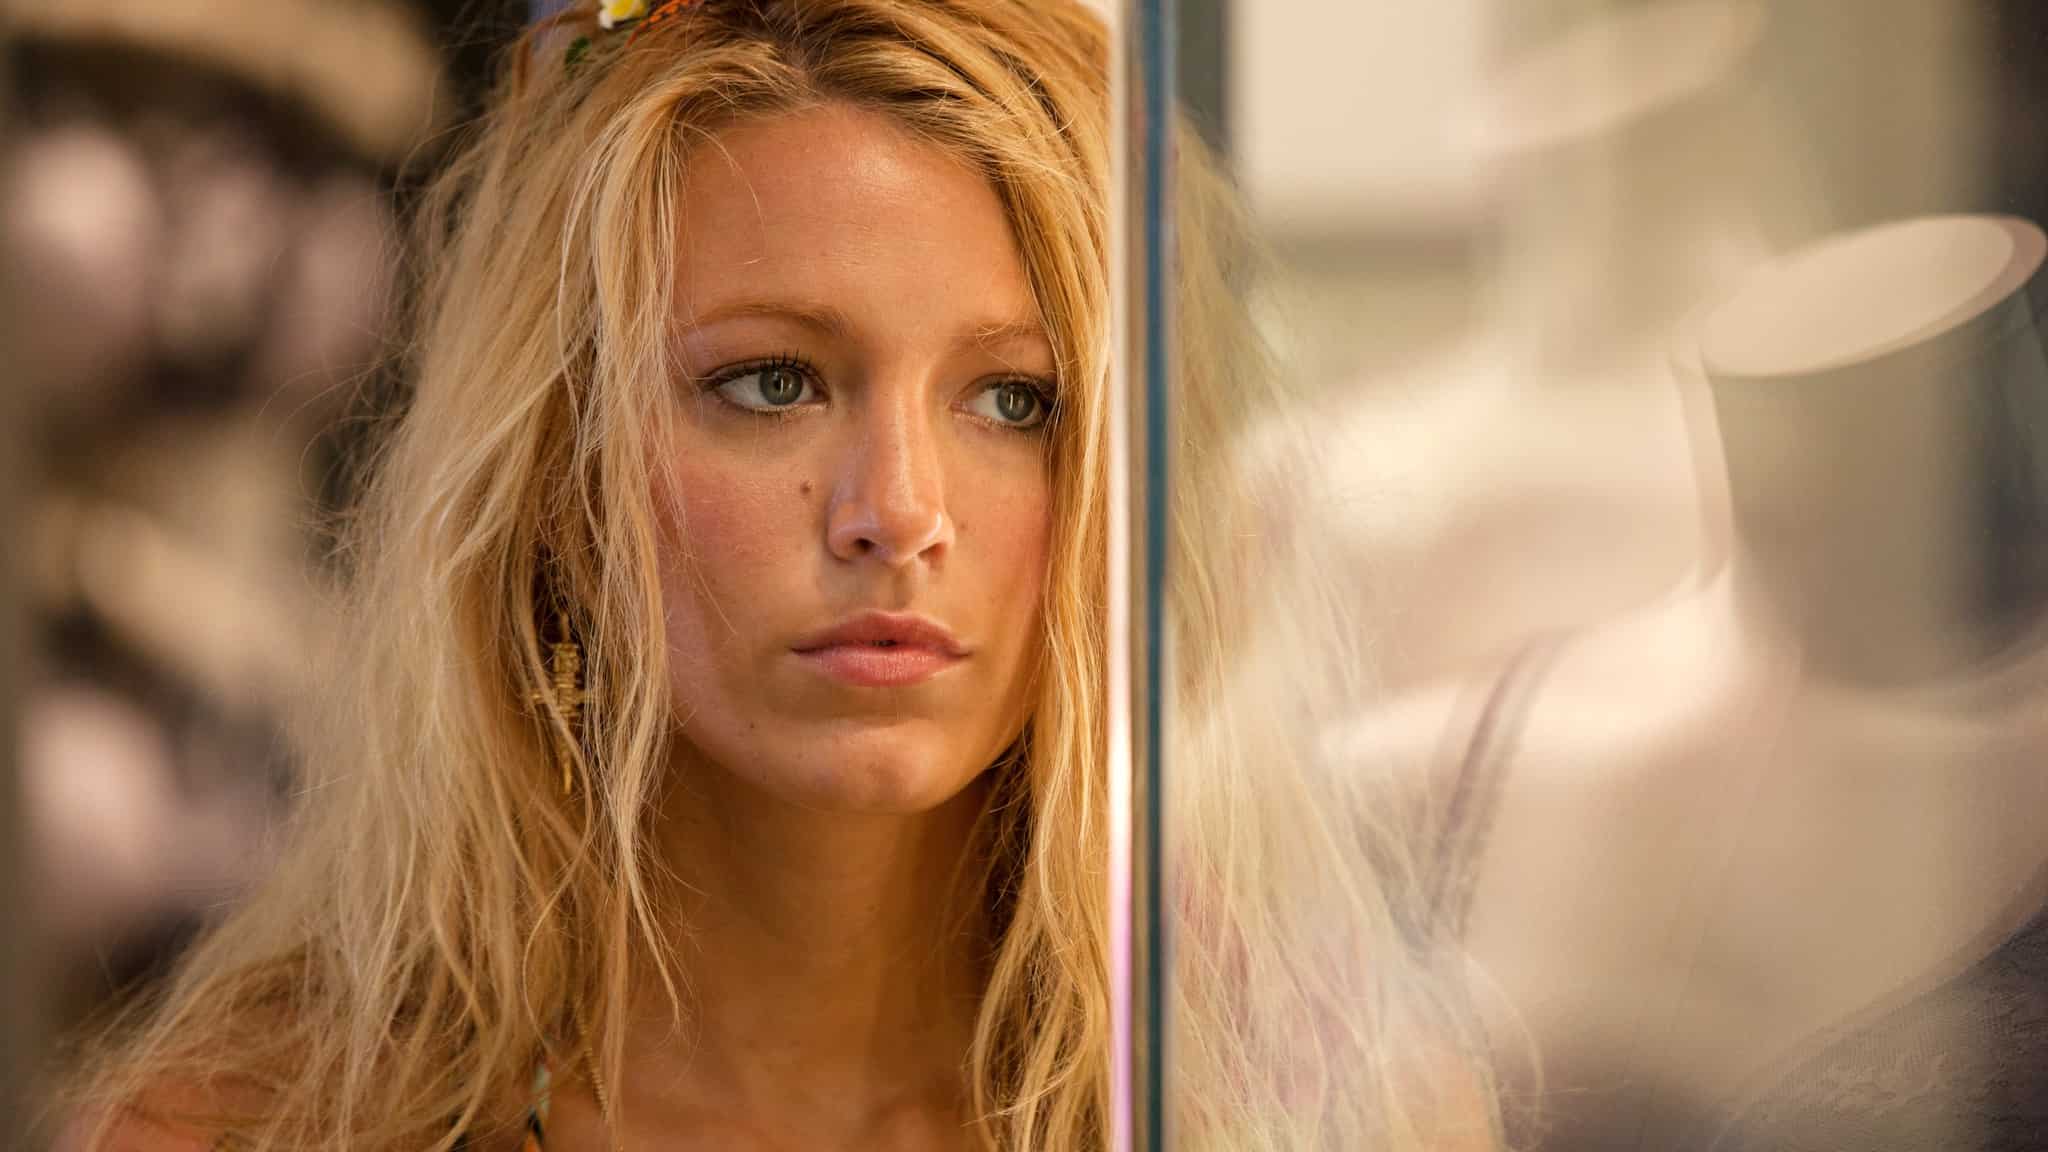 dorri kennedy recommends blake lively sexy scene pic